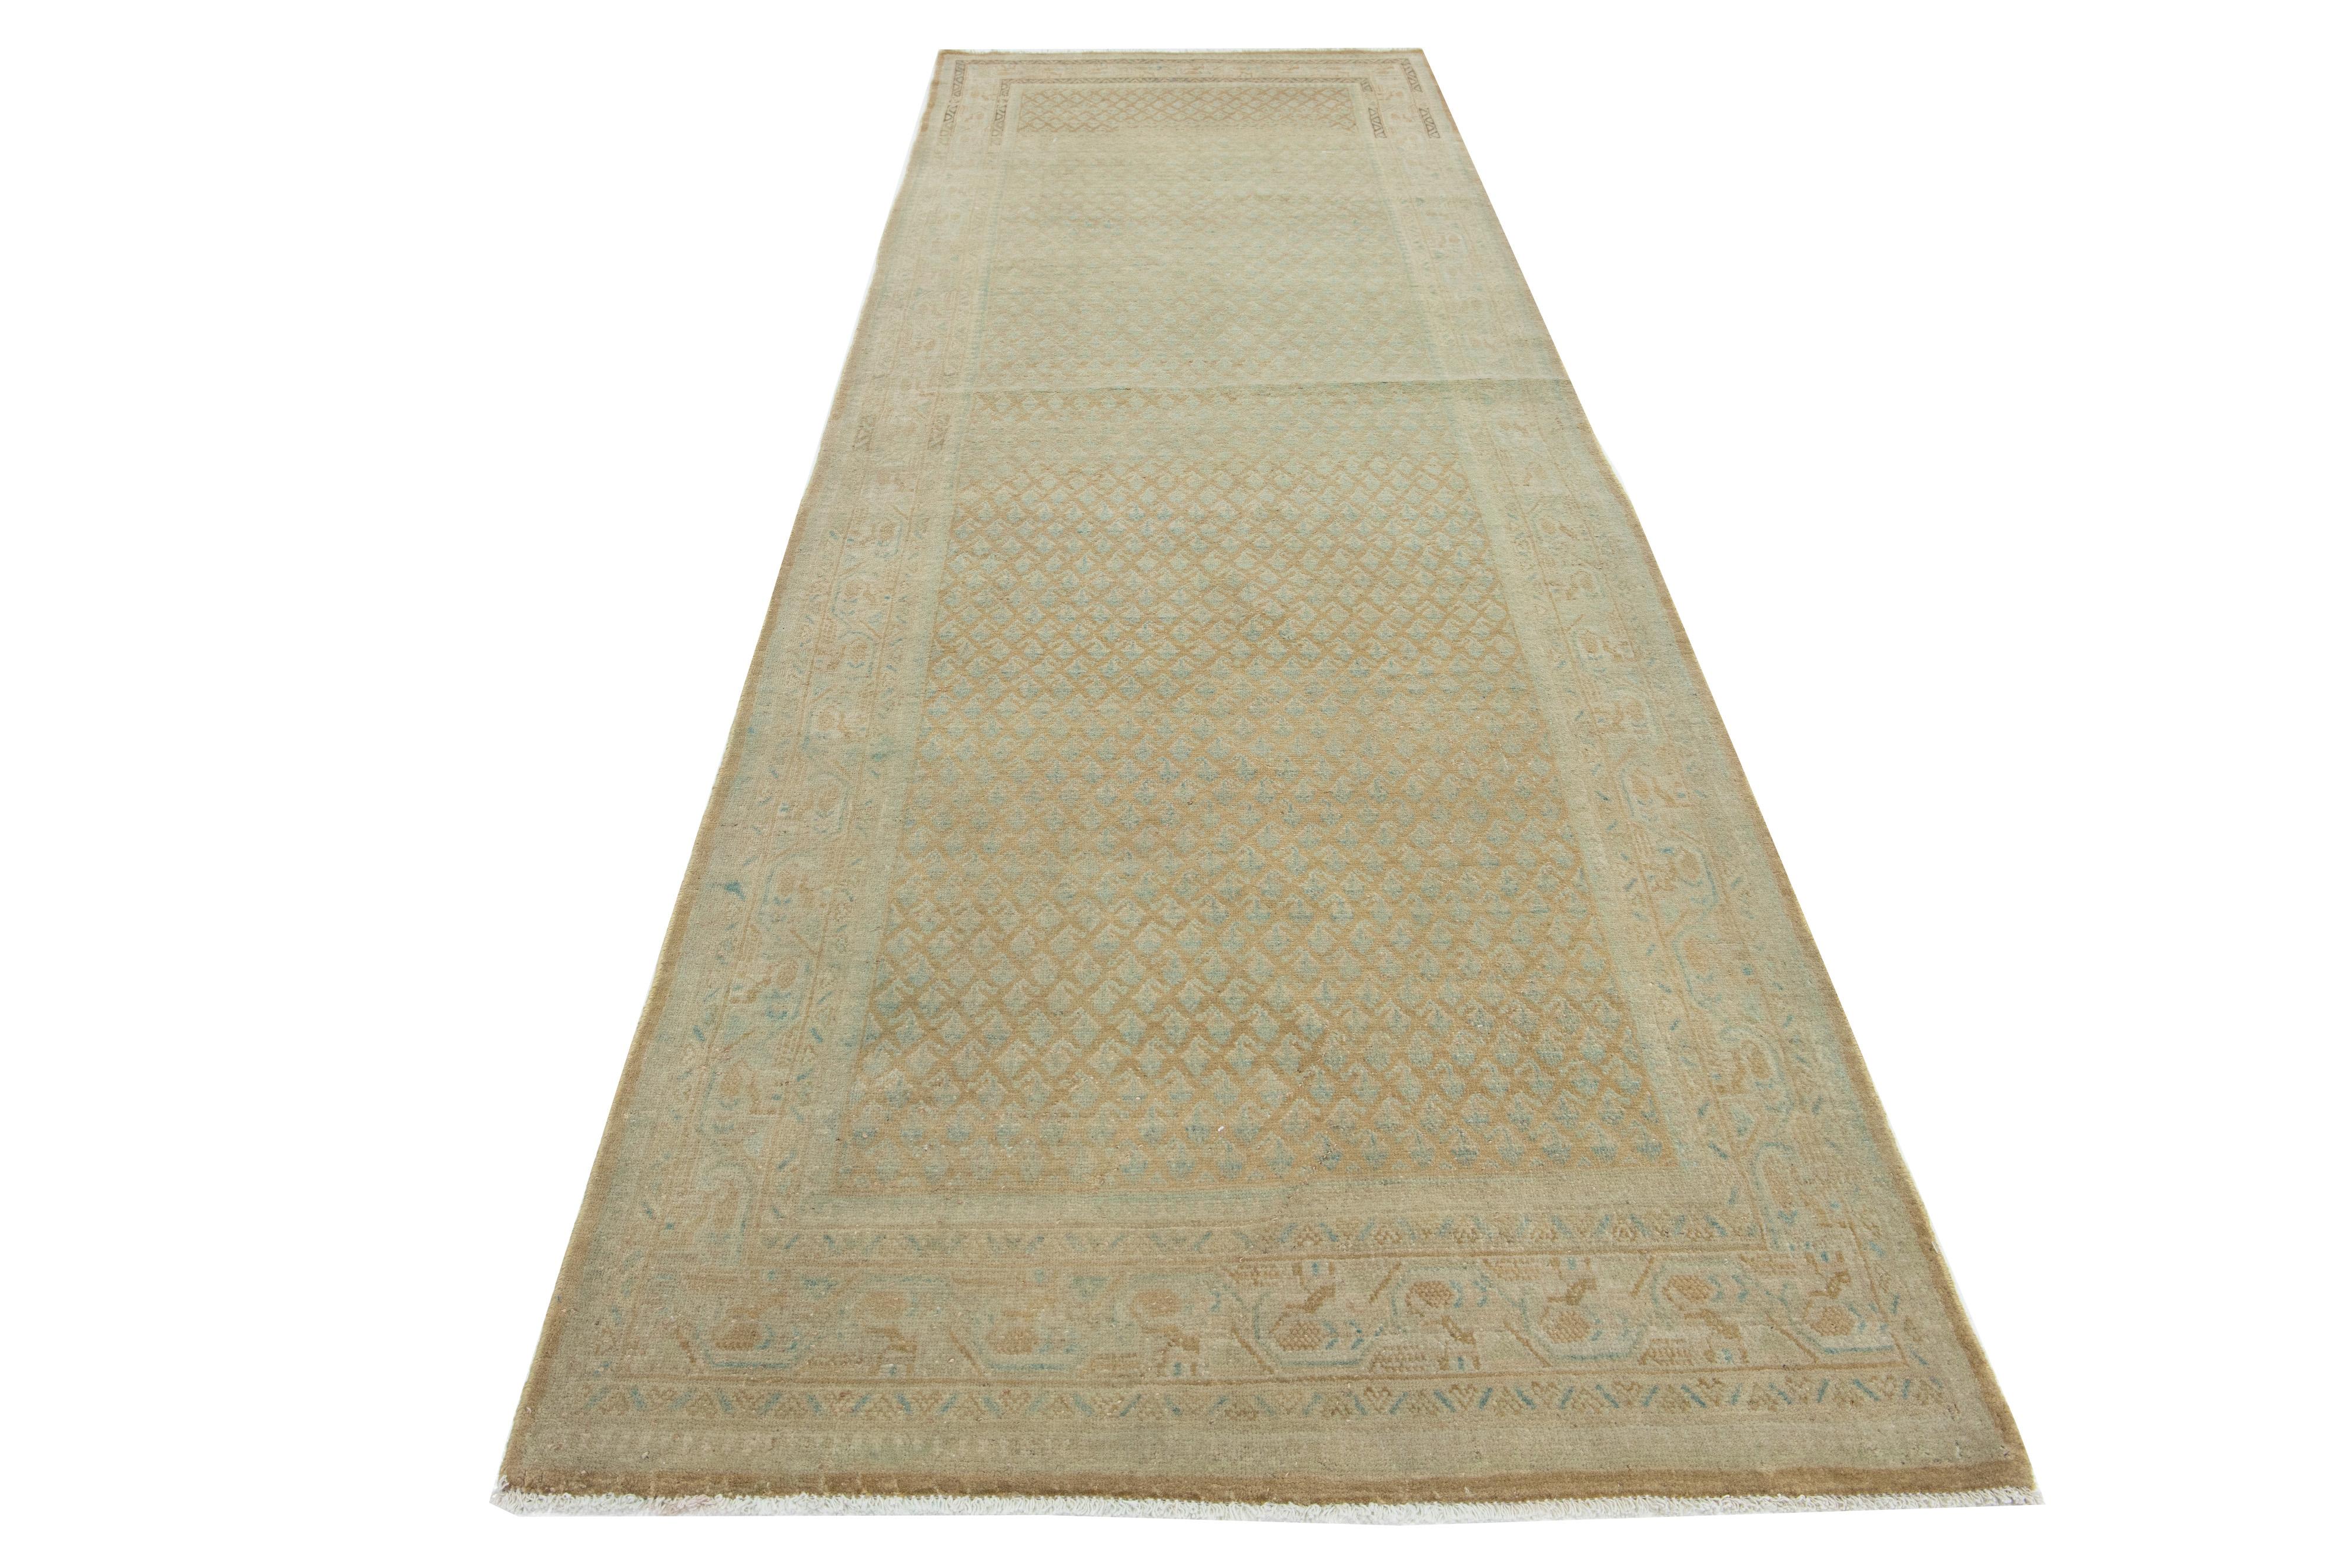 This is a handmade Persian Malayer wool rug from the 20th century. It features a blue field with brown and beige accents throughout the design.

This rug measures 3'9